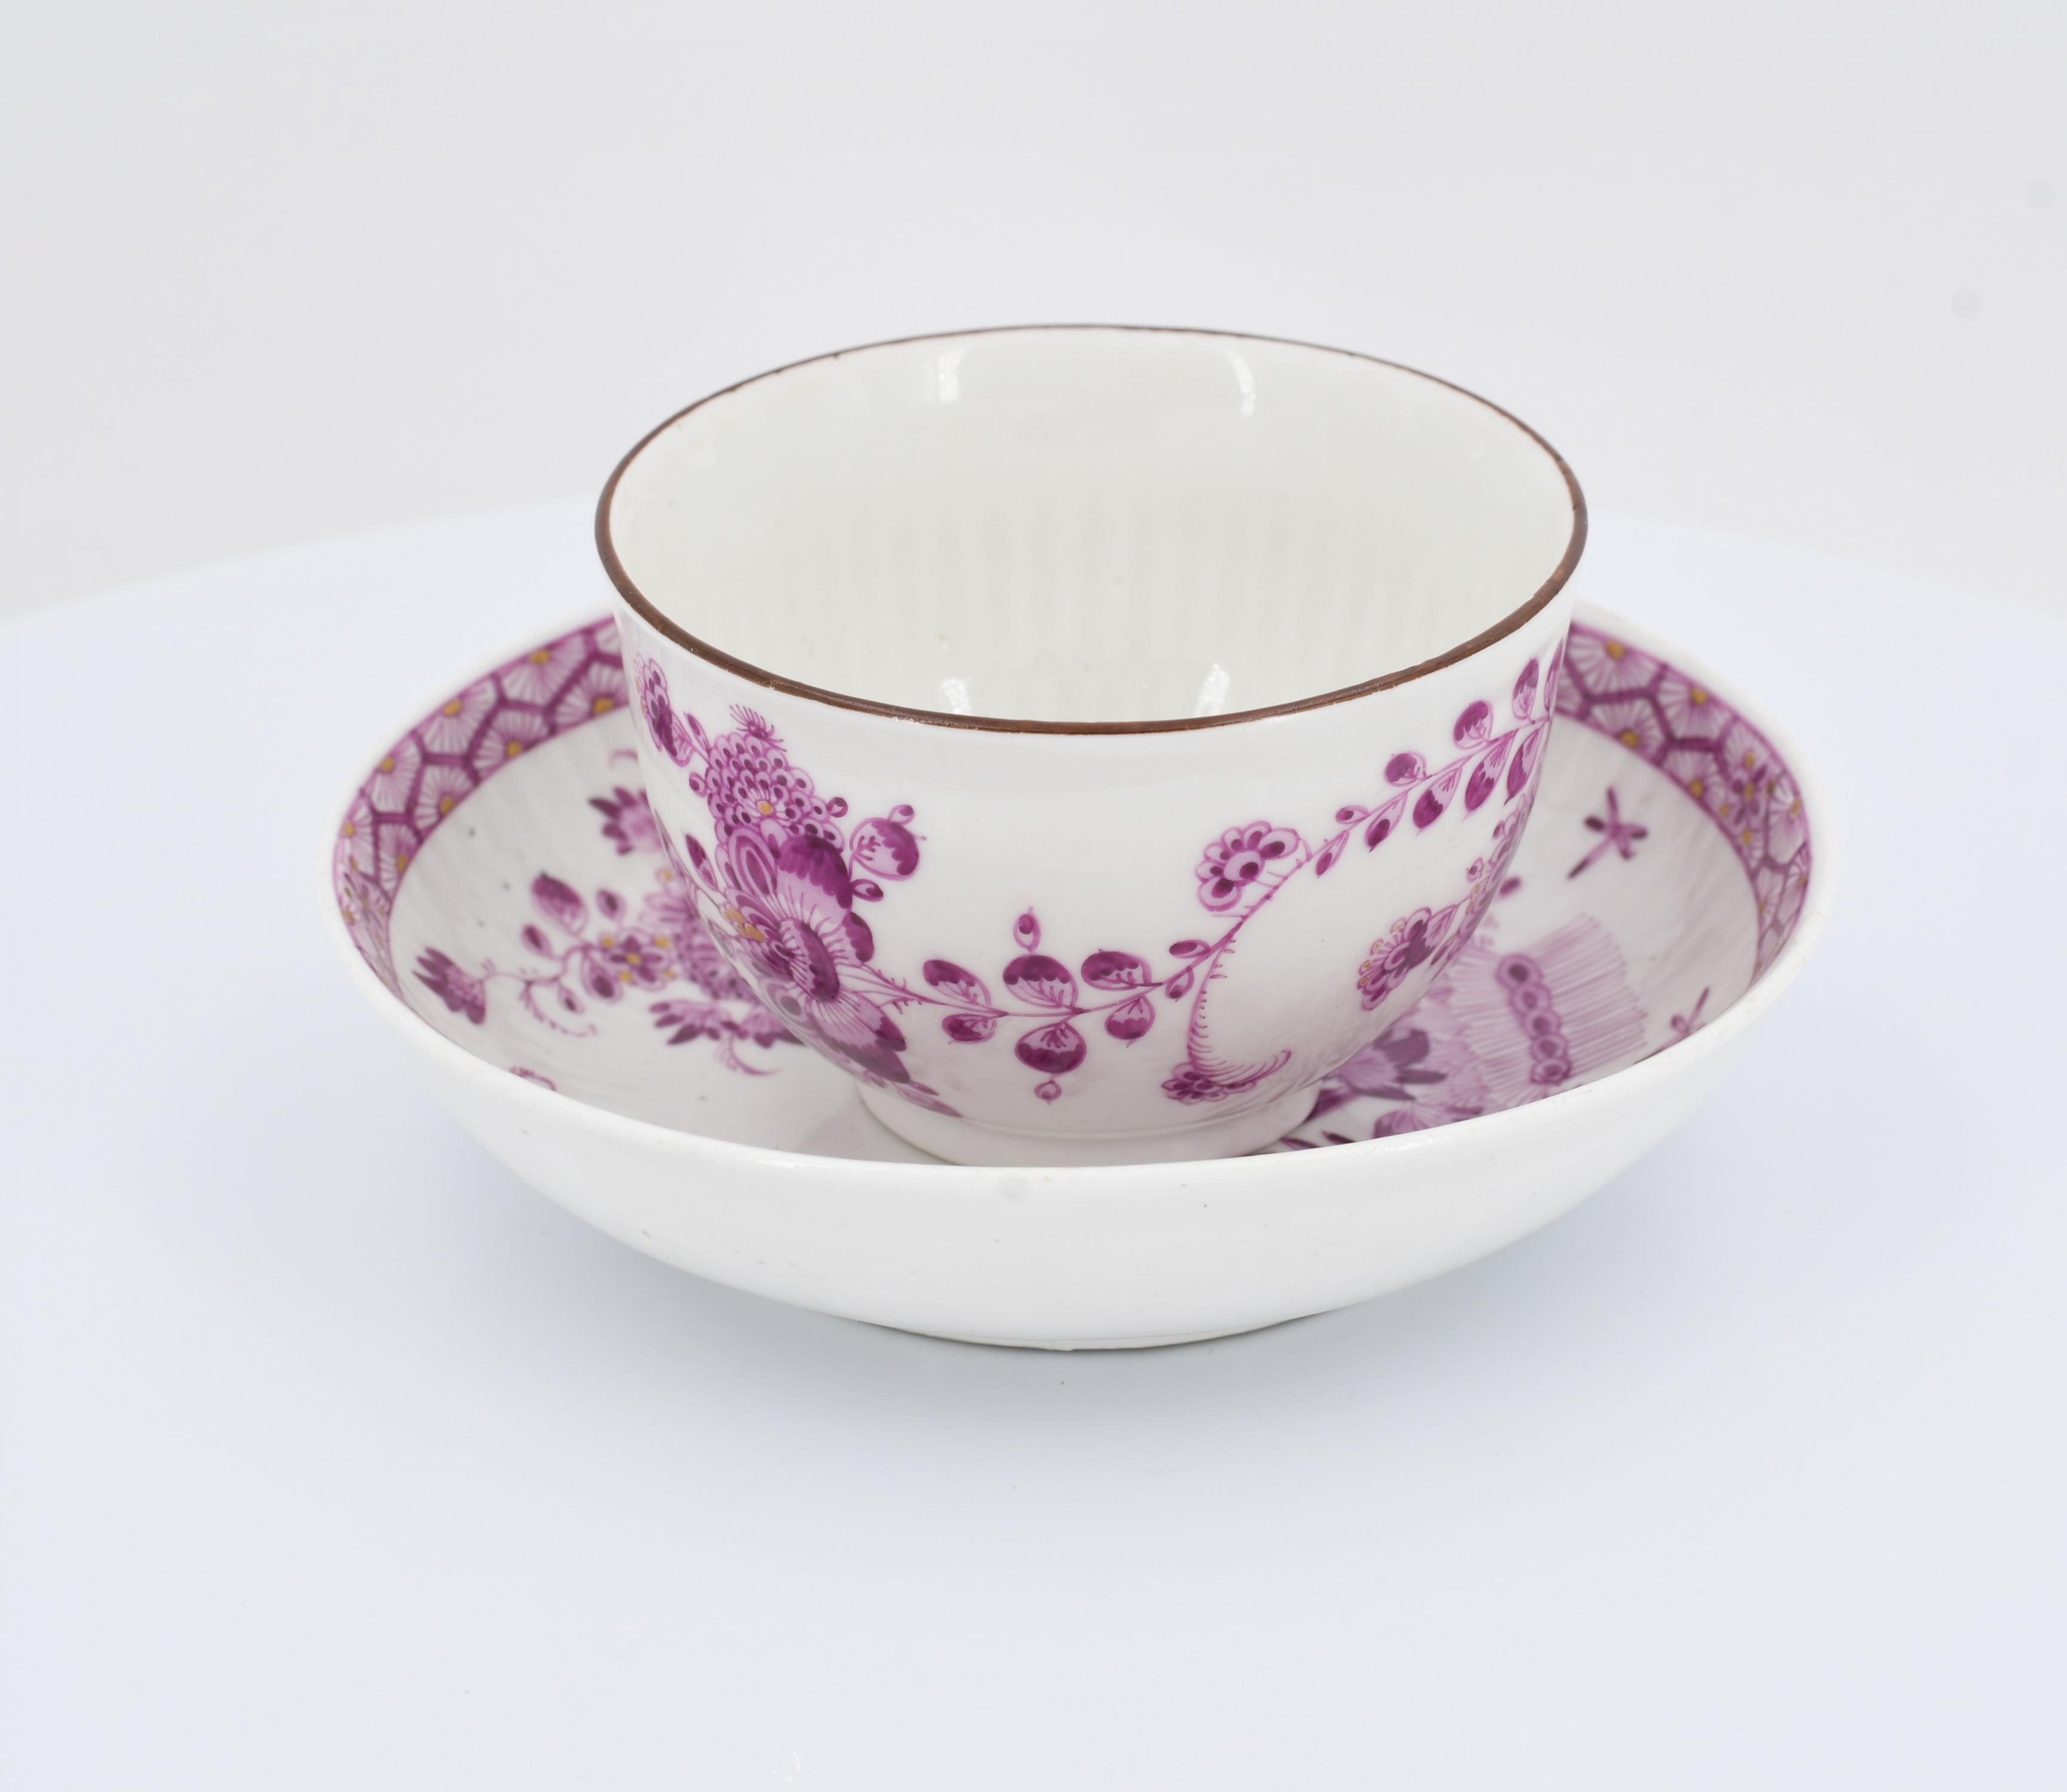 Two cups and saucers with floral décor - Image 5 of 19